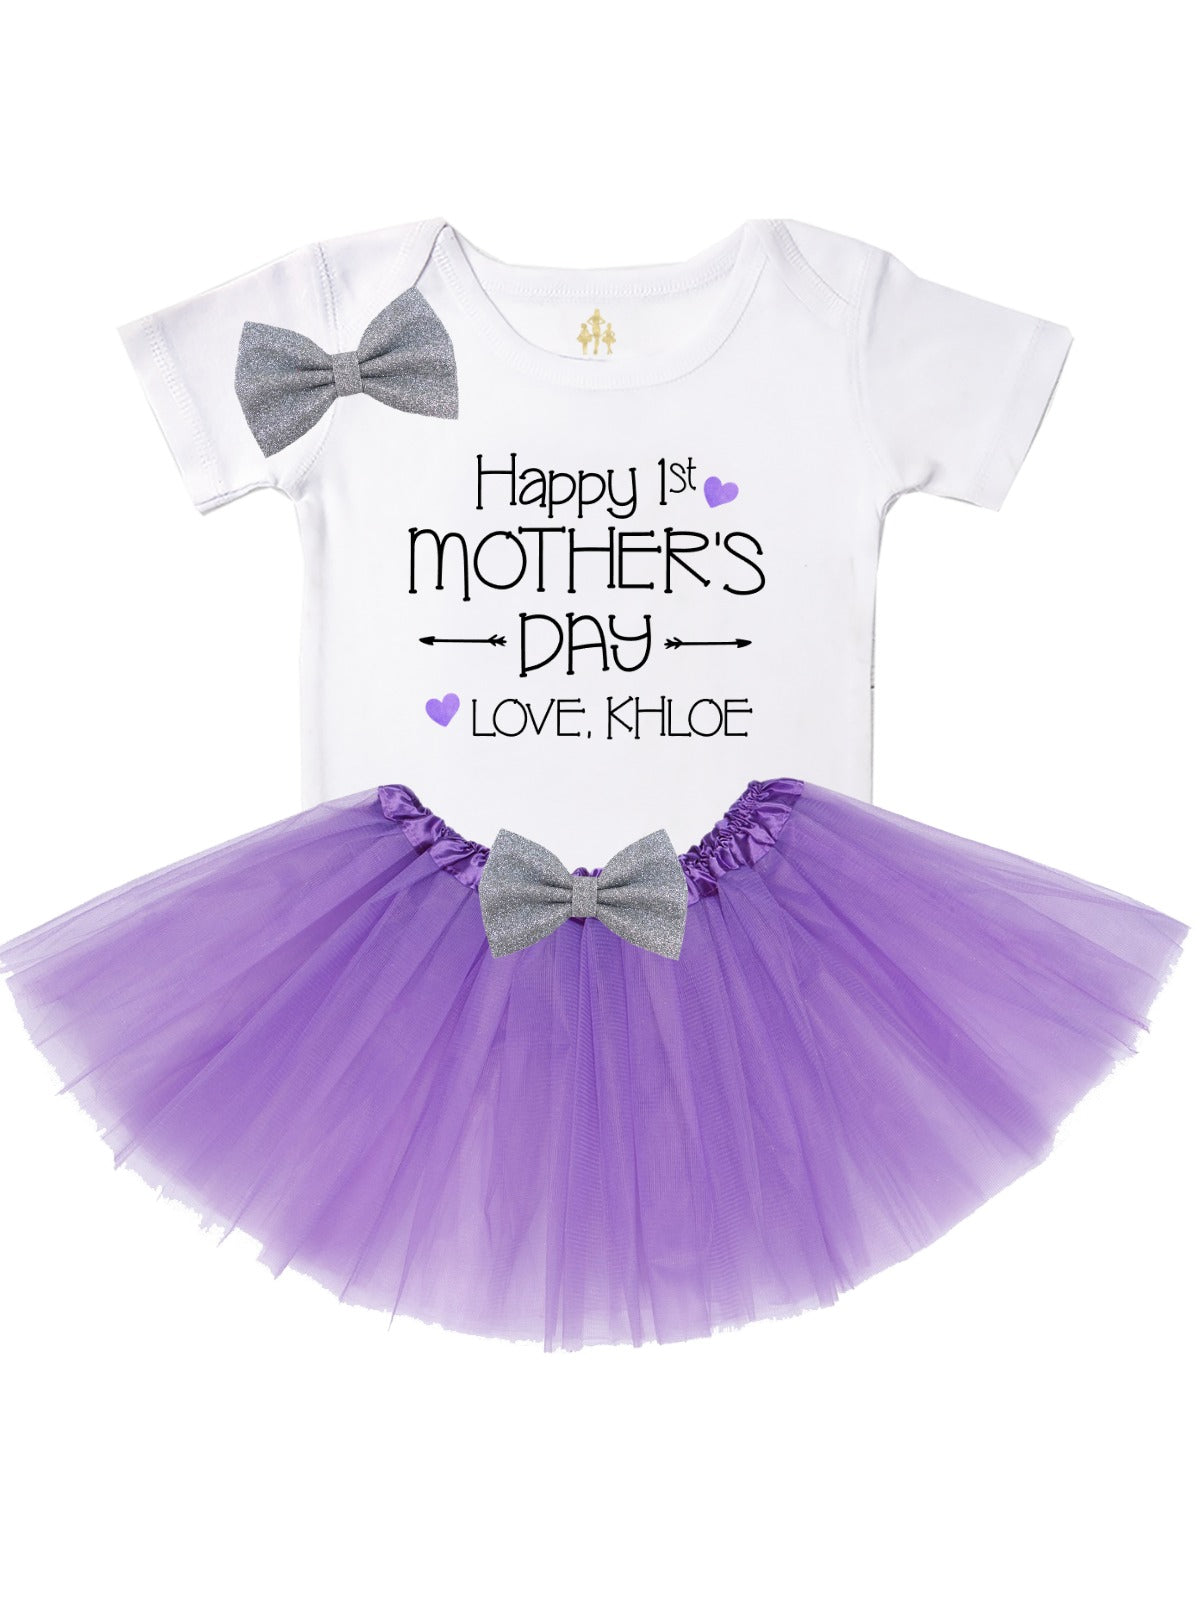 Happy 1st Mother's Day Personalized Tutu Outfit